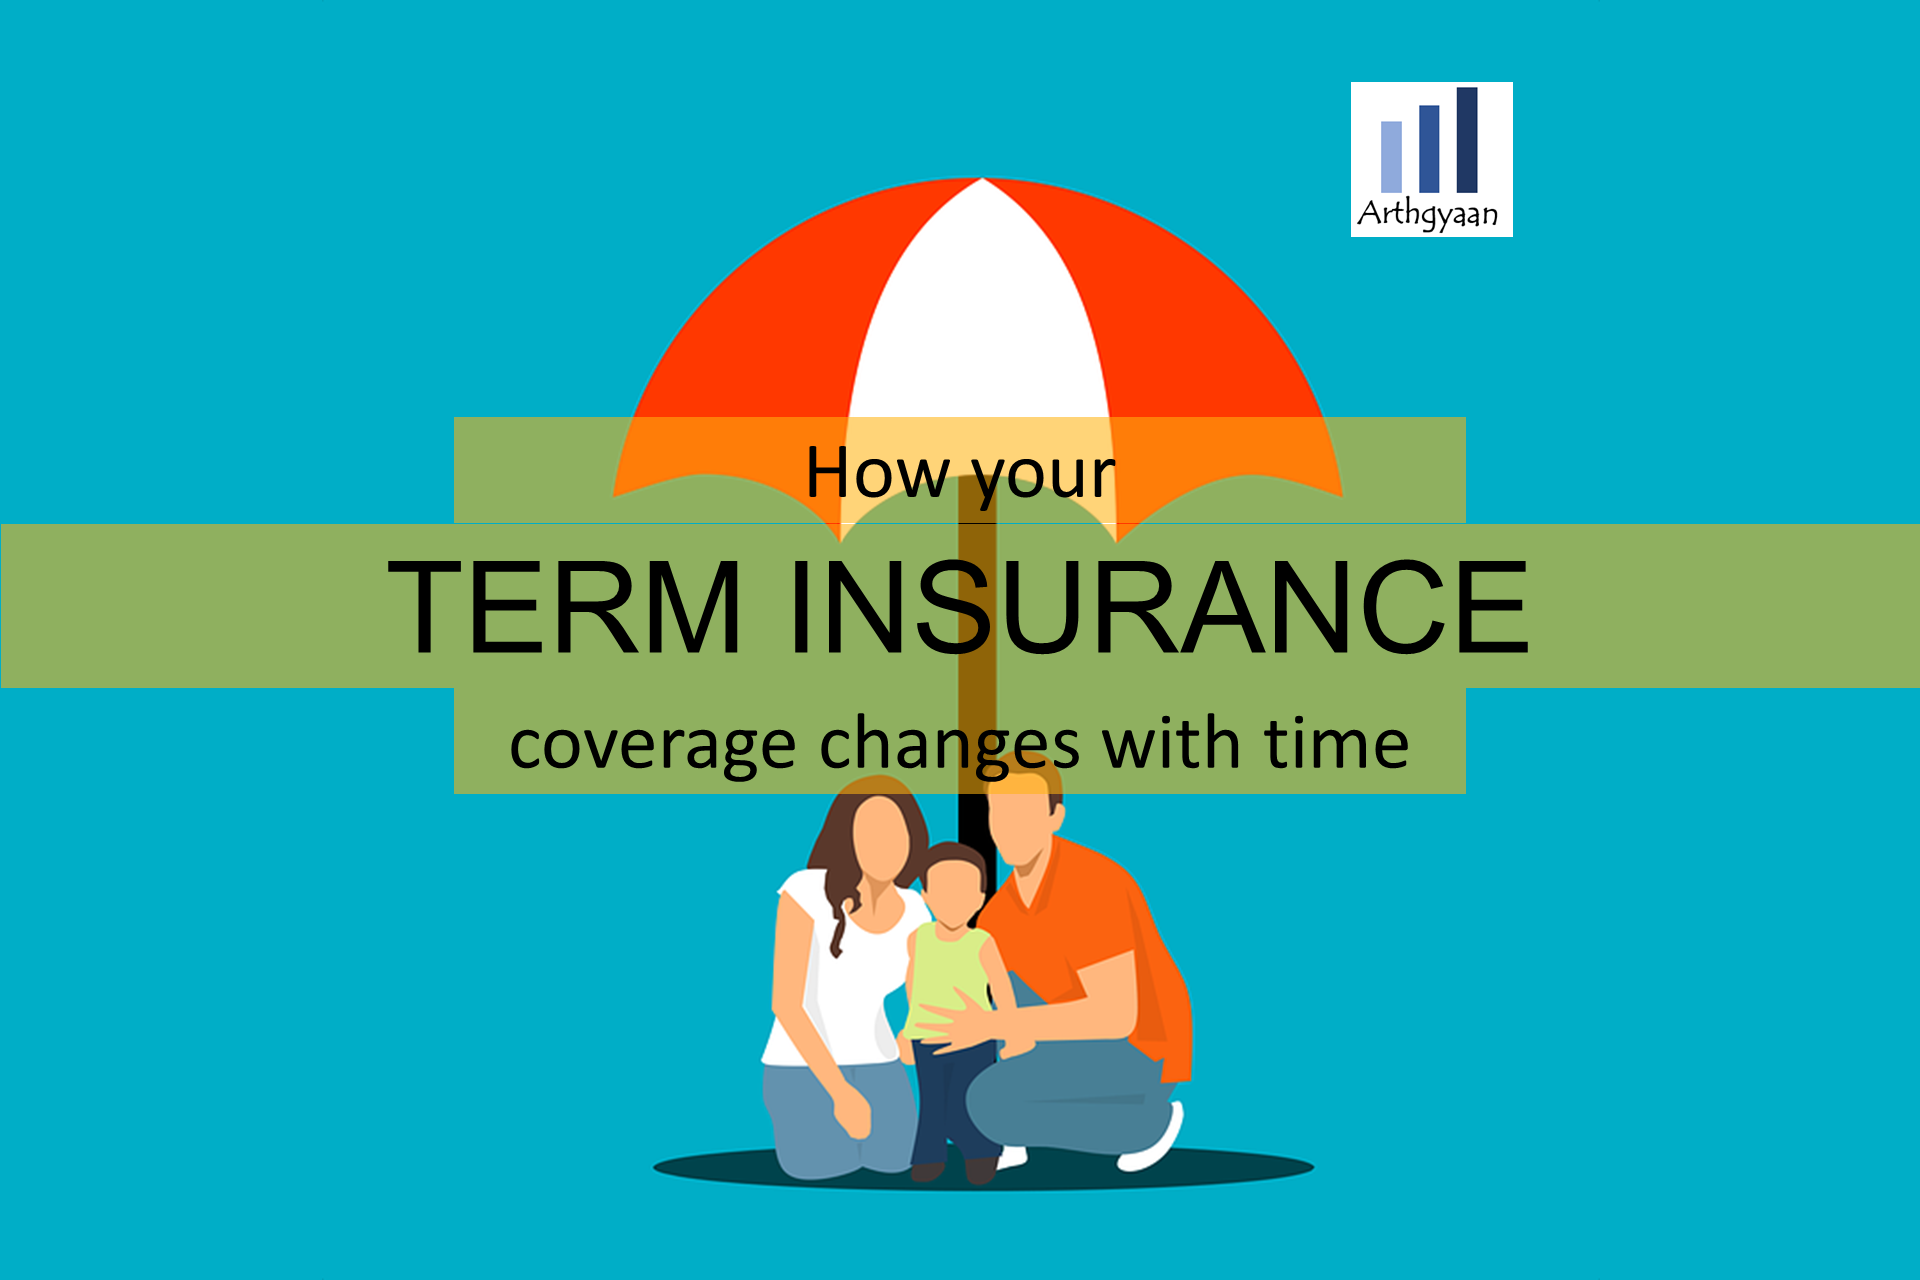 How your insurance coverage changes with time